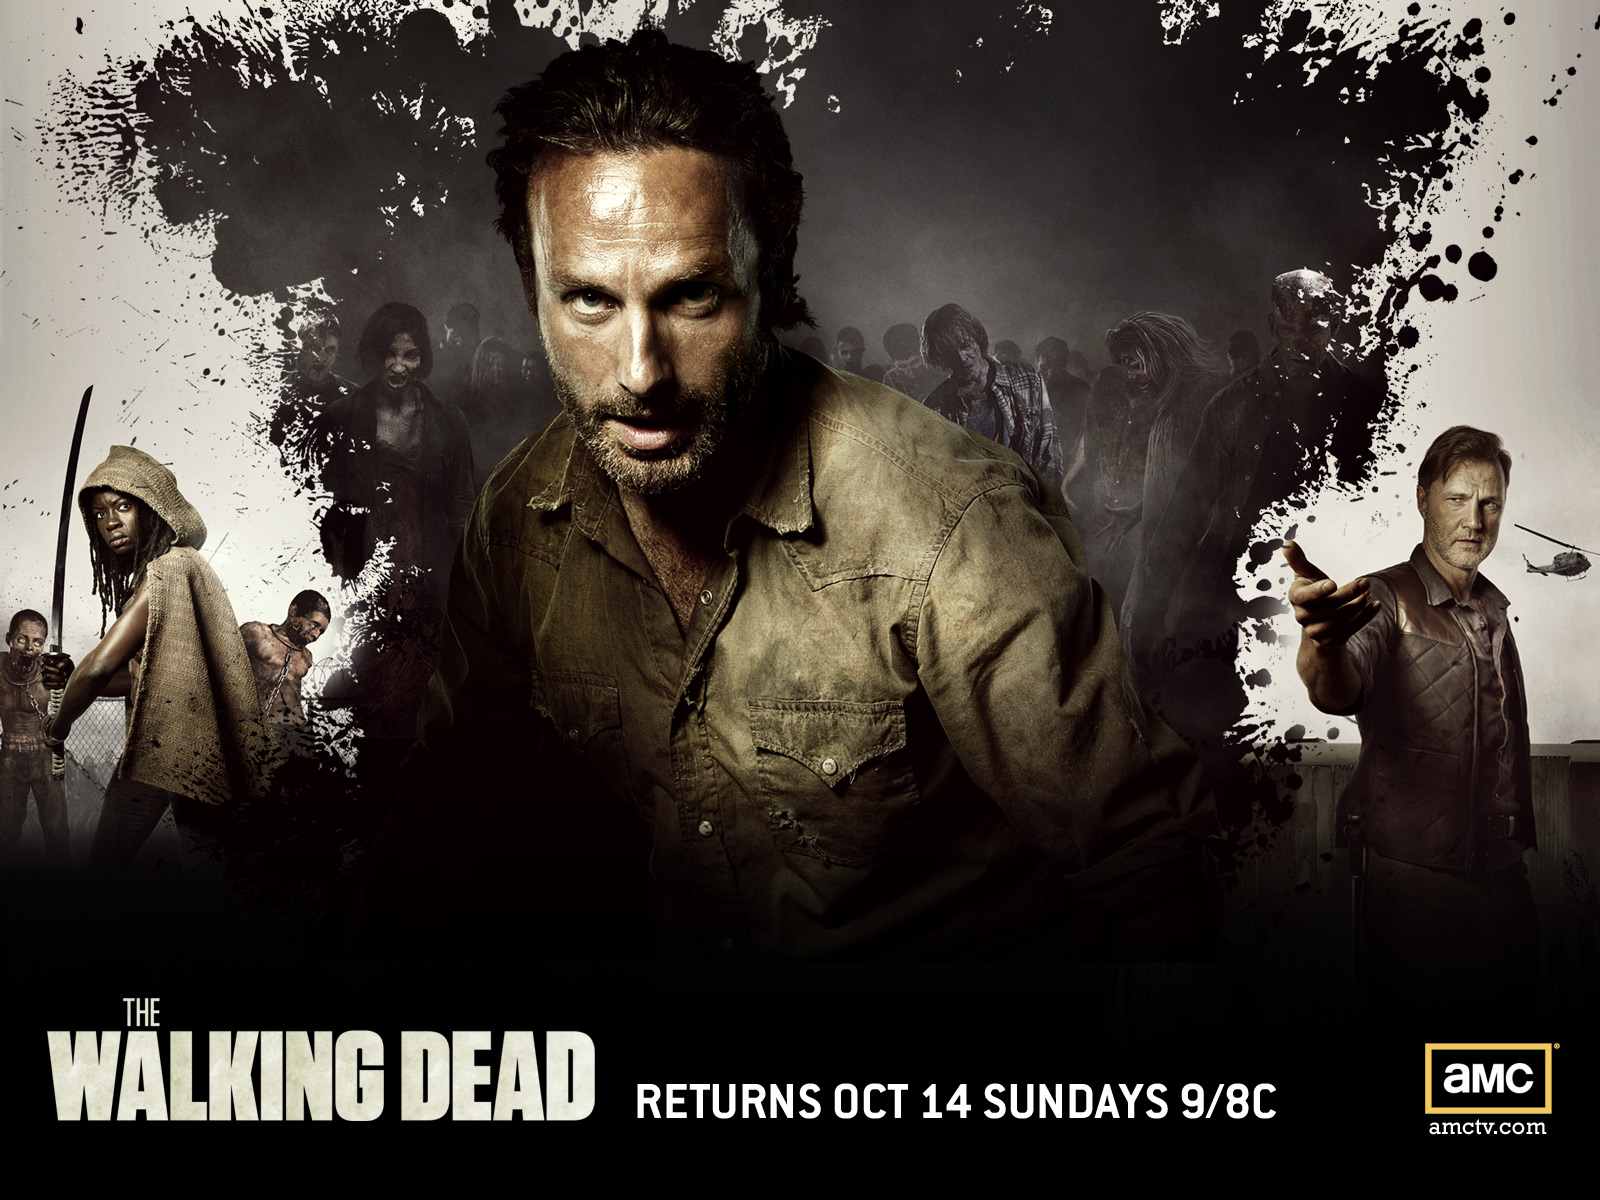 the walking dead wallpaper,movie,poster,font,photography,photo caption